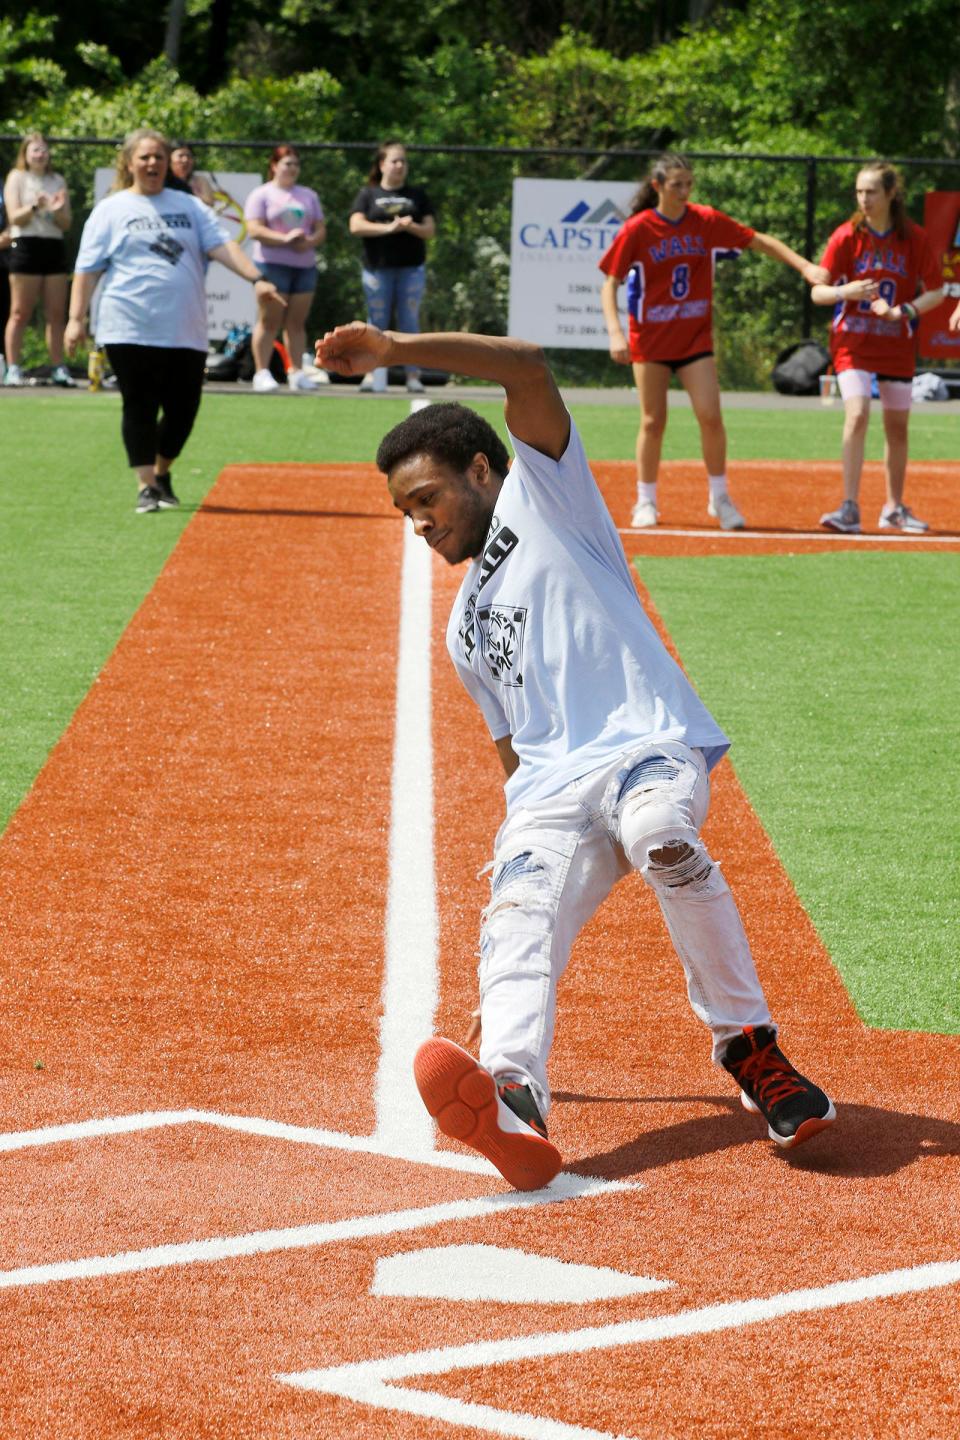 Toms River East Unified's Keynen Hardy makes an artful slide into home during kick ball game against Wall Unified at the Toms River Field of Dreams Tuesday, May 16, 2023.